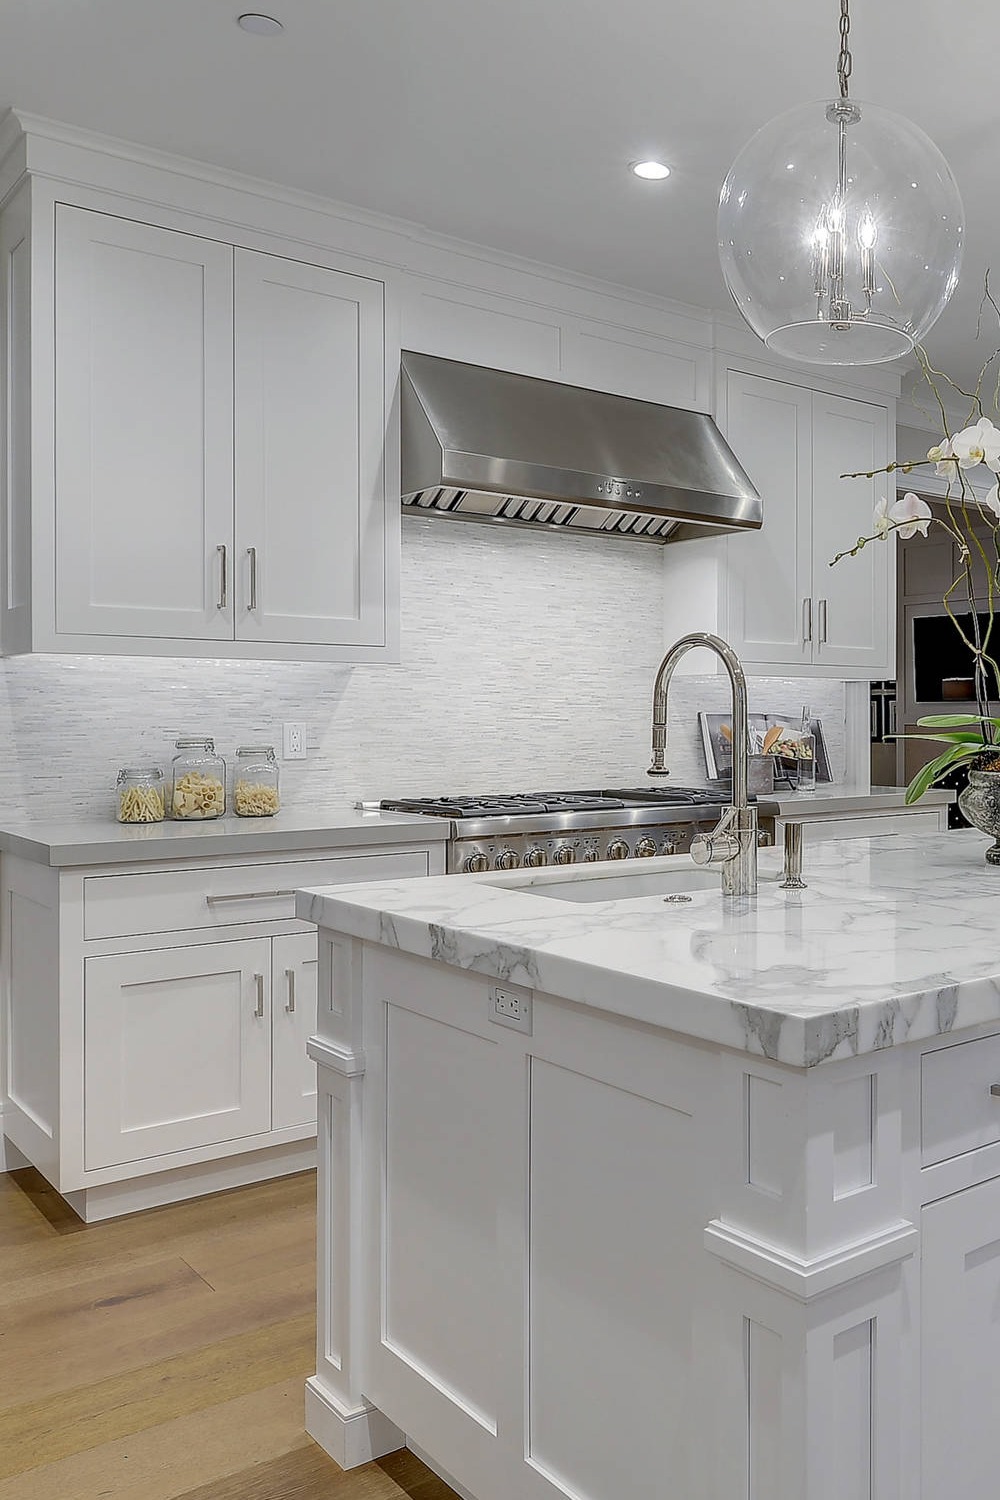 Backsplash Ideas For White Marble Countertops Stone Backsplash Mosaic Tile Backsplash Ideas With White Cabinets Gray Grout